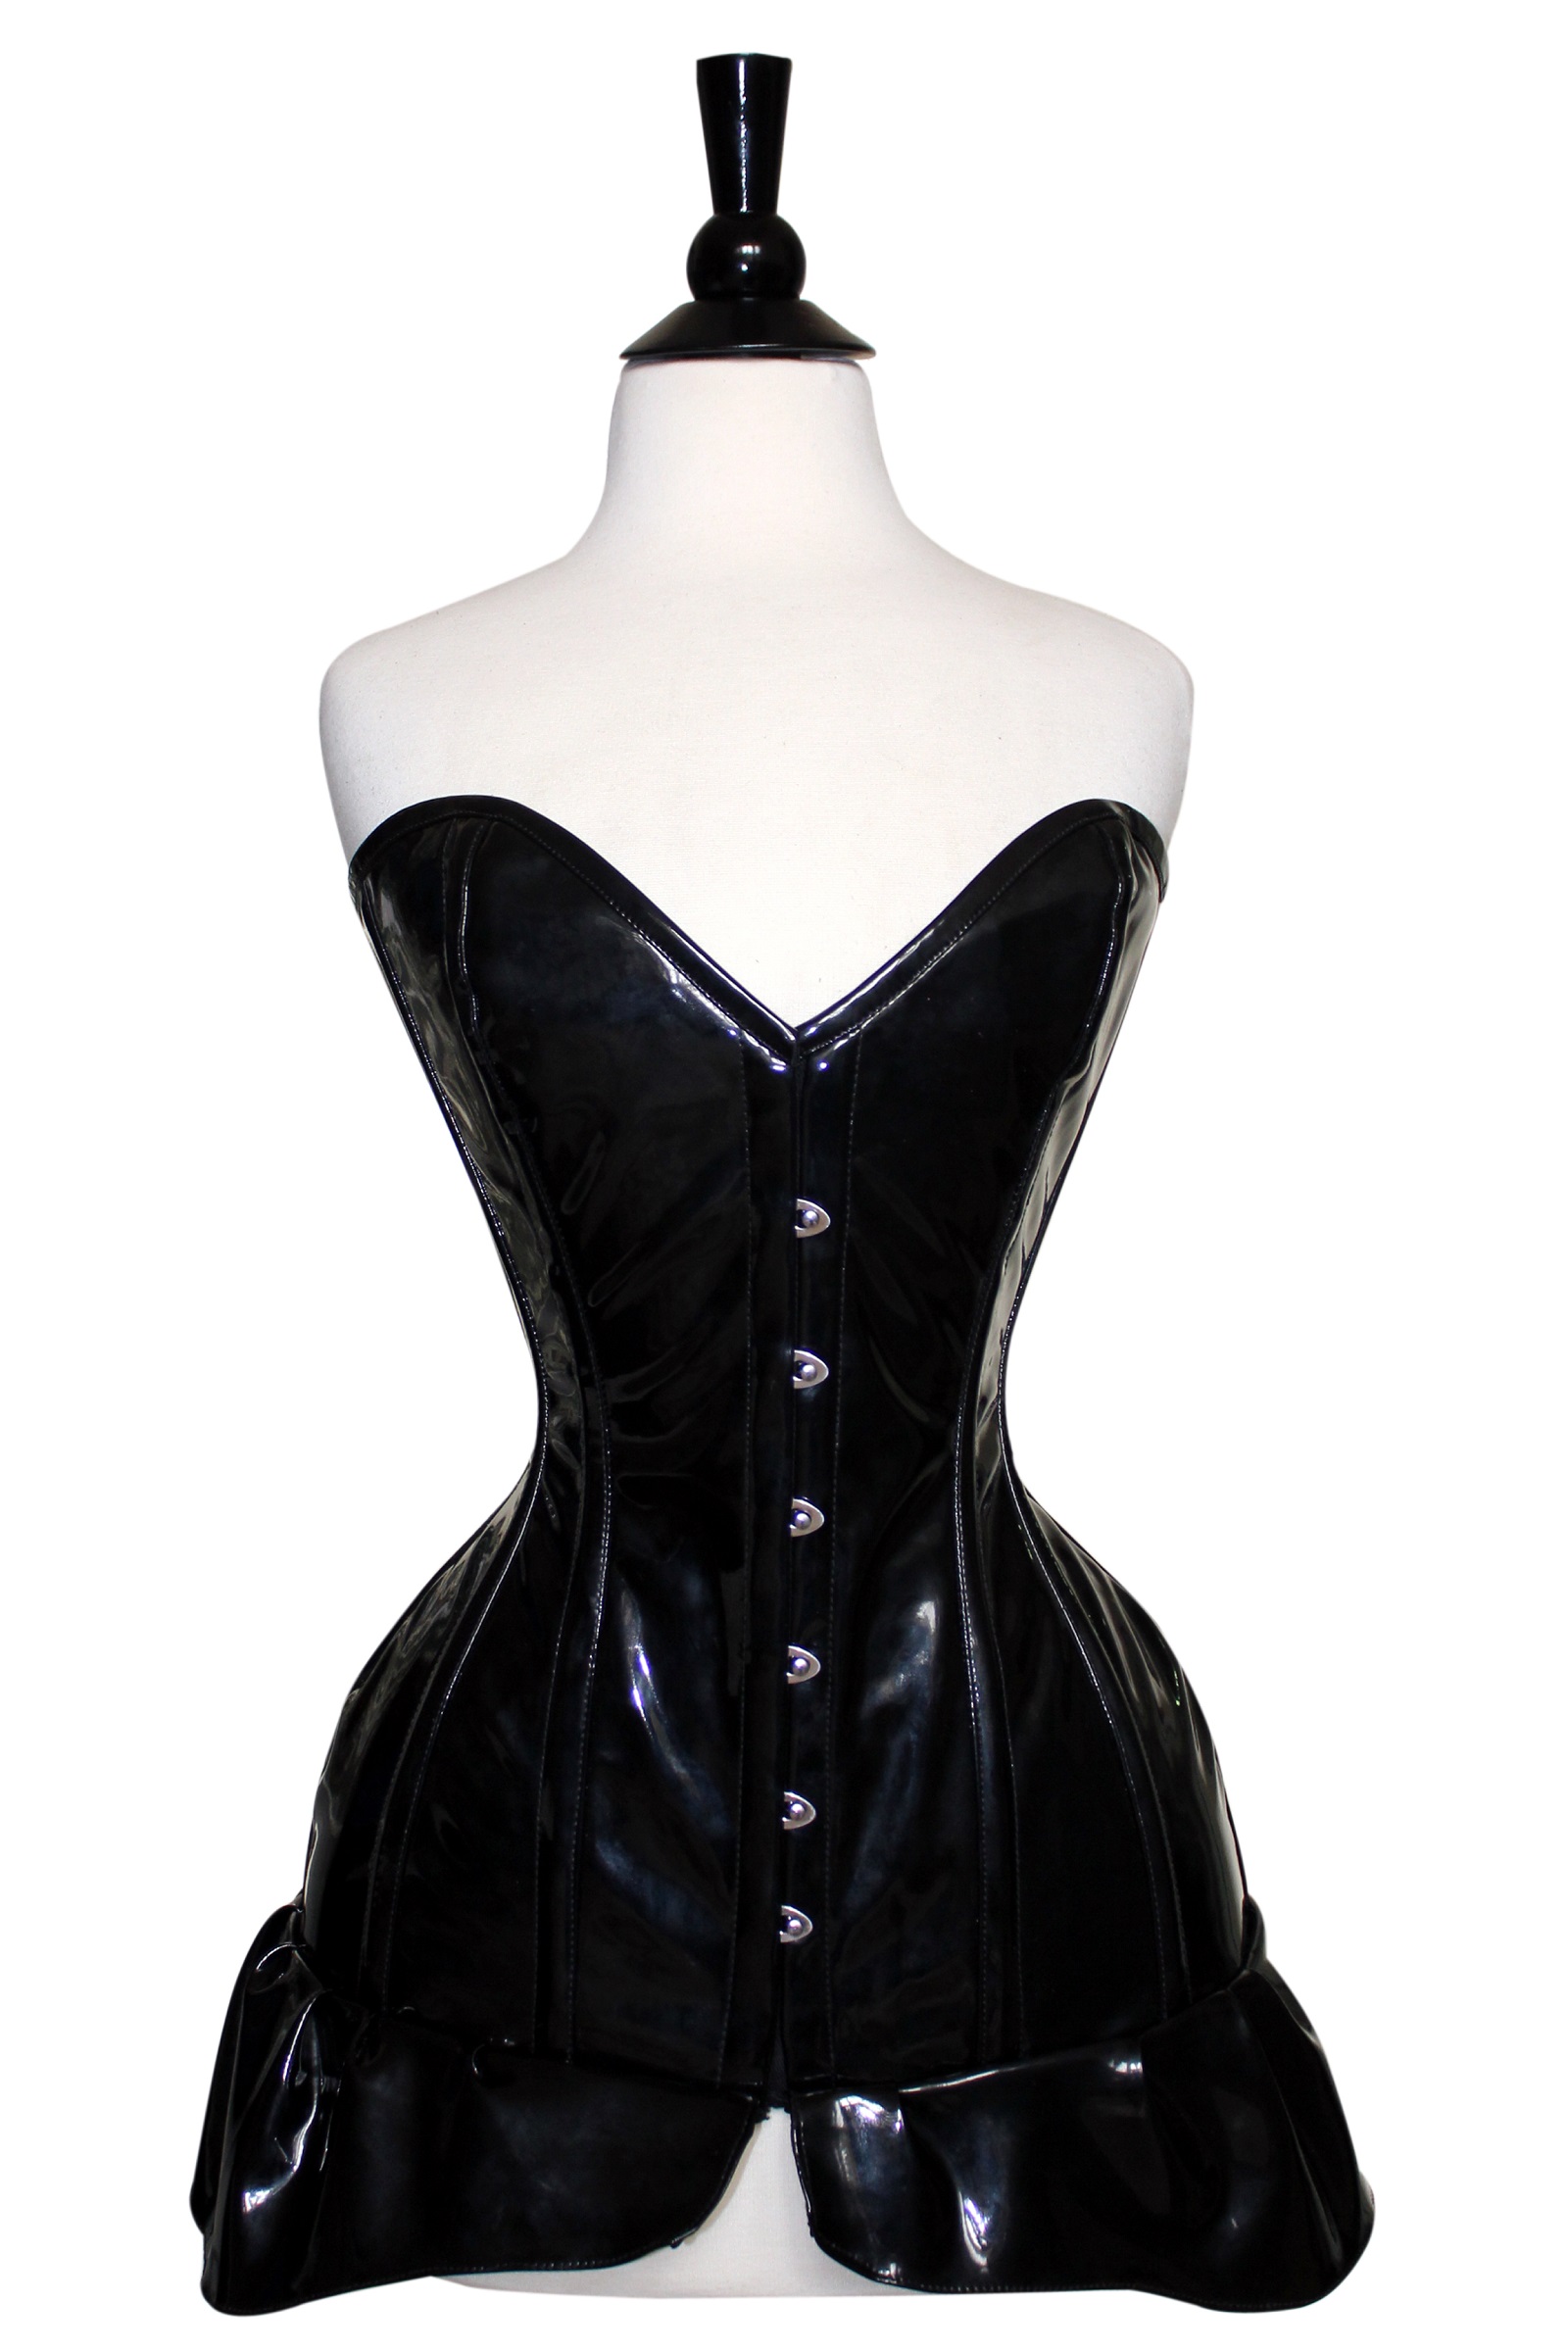 Black PVC butterfly Overbust corset